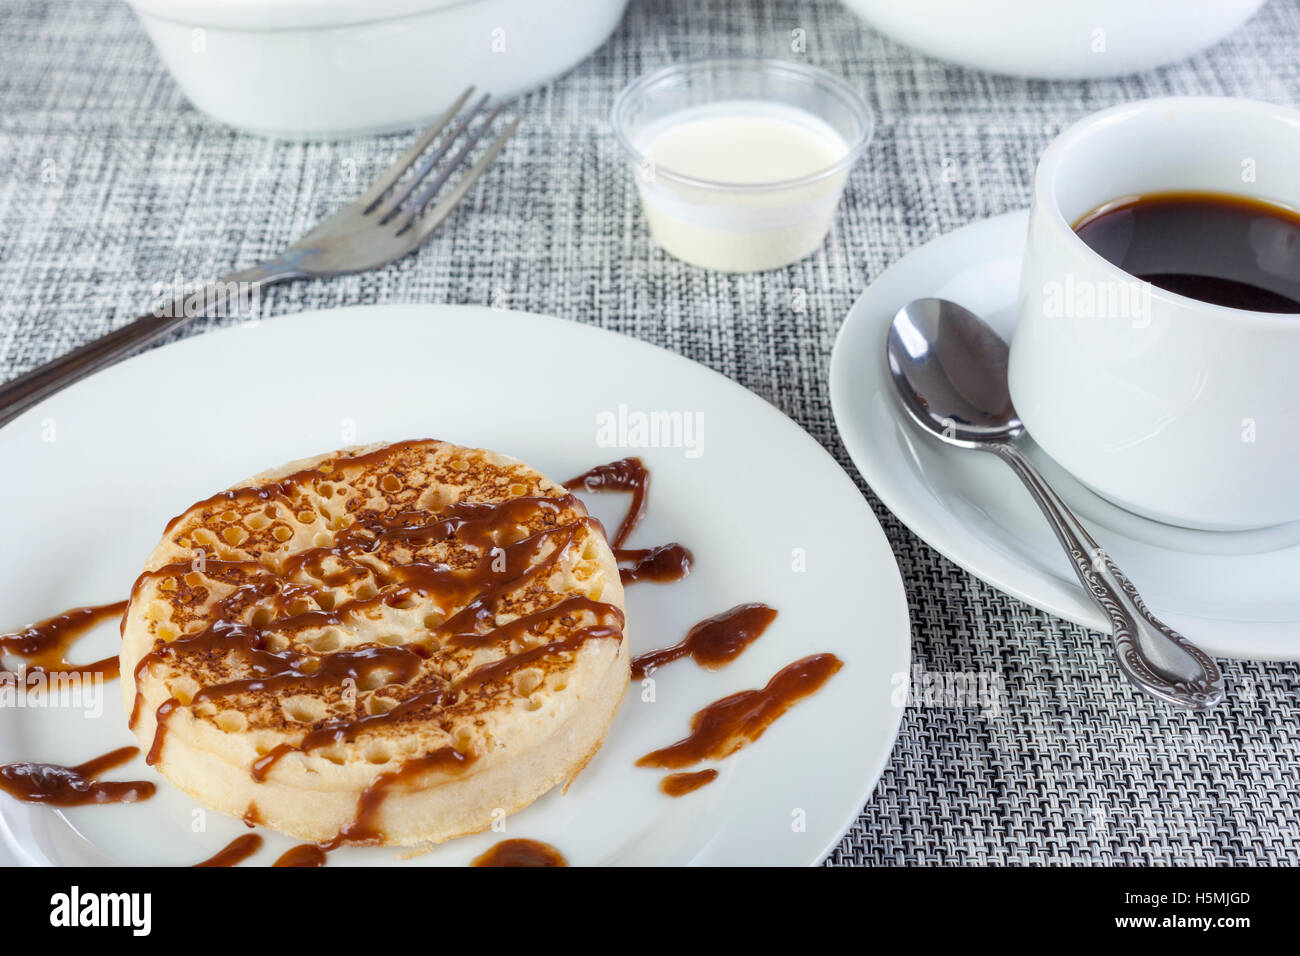 Sticky chocolate sauce on a freshly toasted crumpet with coffee on a breakfast table Stock Photo